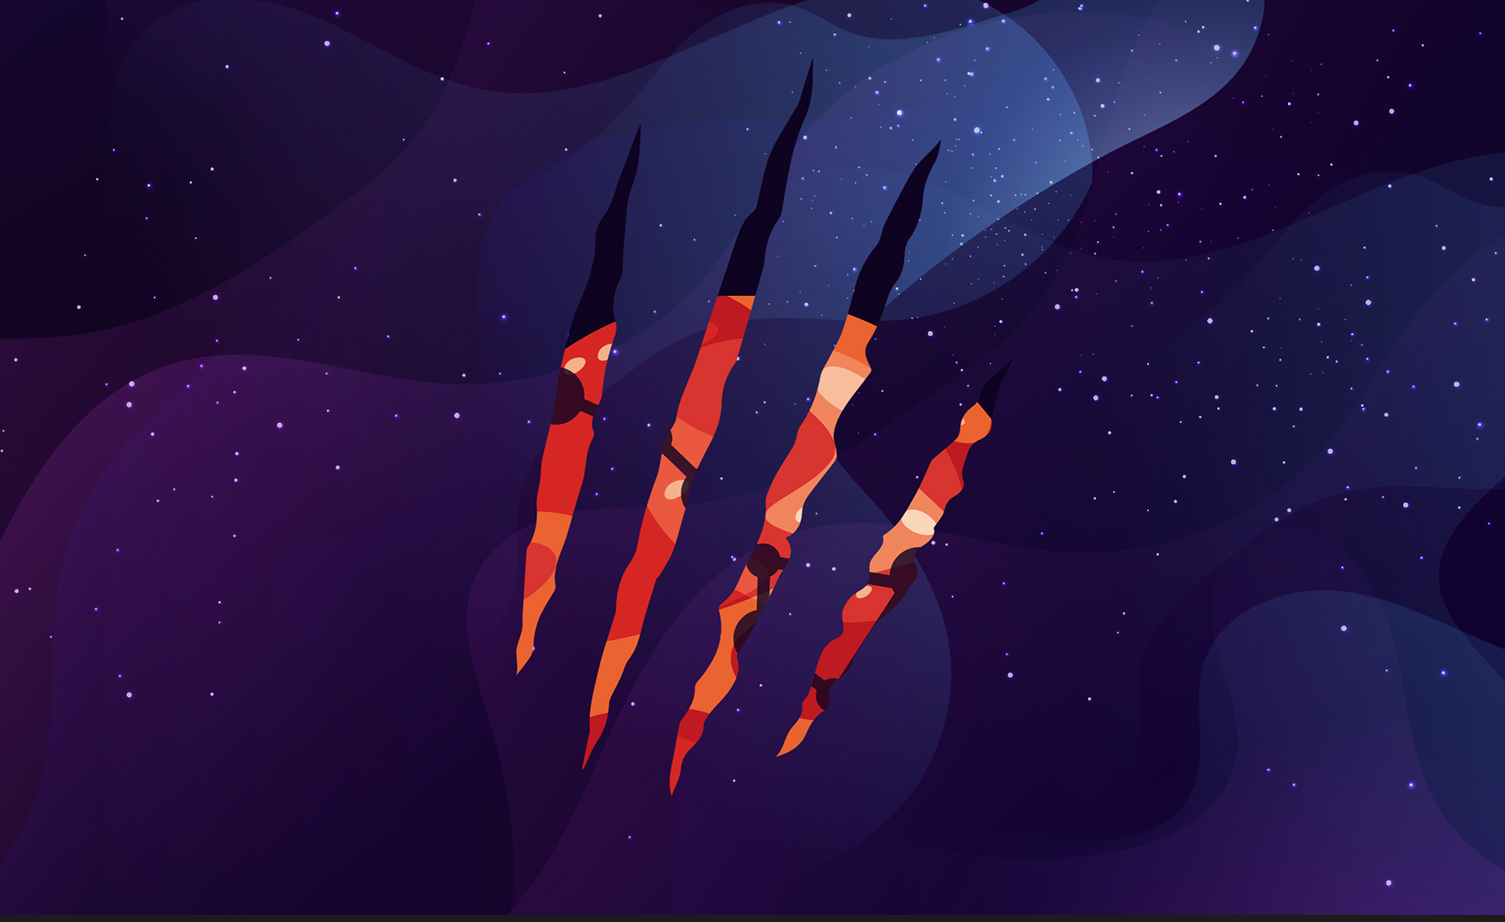 A stylized portrayal of APT Fighting Ursa. The marks from bear claws in bright orange against the backdrop of a night sky.